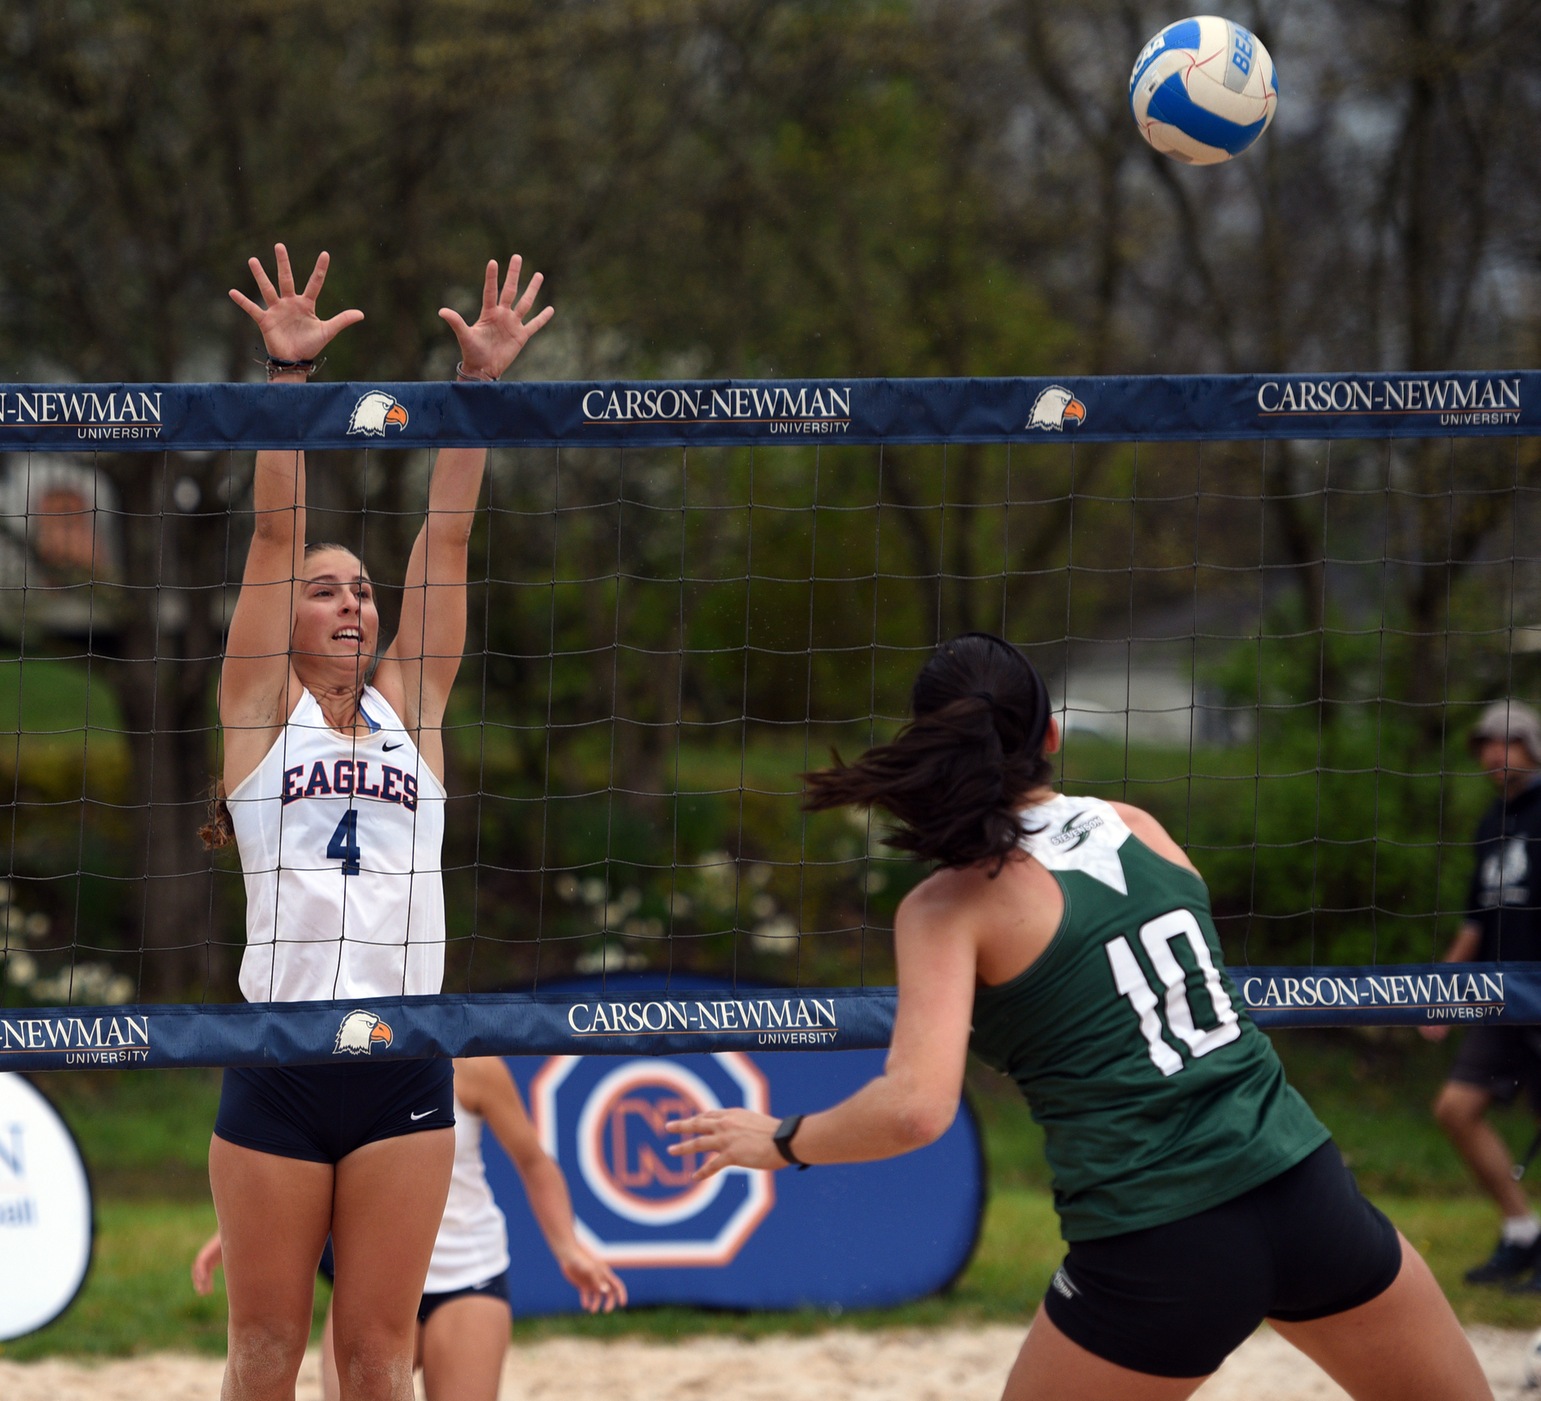 C-N faces two losses in day one of Small College Championships